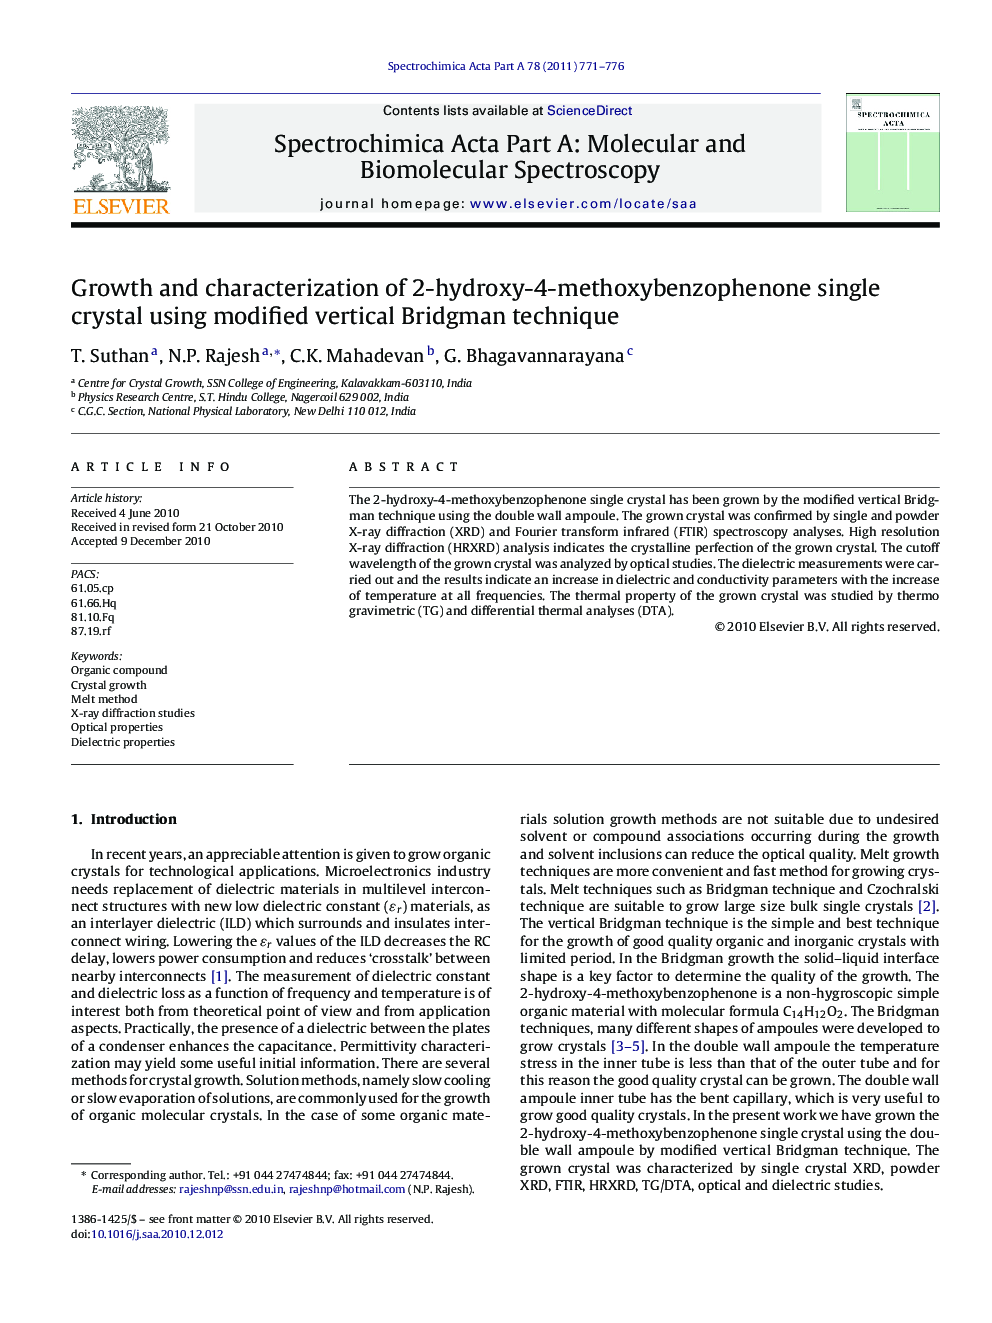 Growth and characterization of 2-hydroxy-4-methoxybenzophenone single crystal using modified vertical Bridgman technique